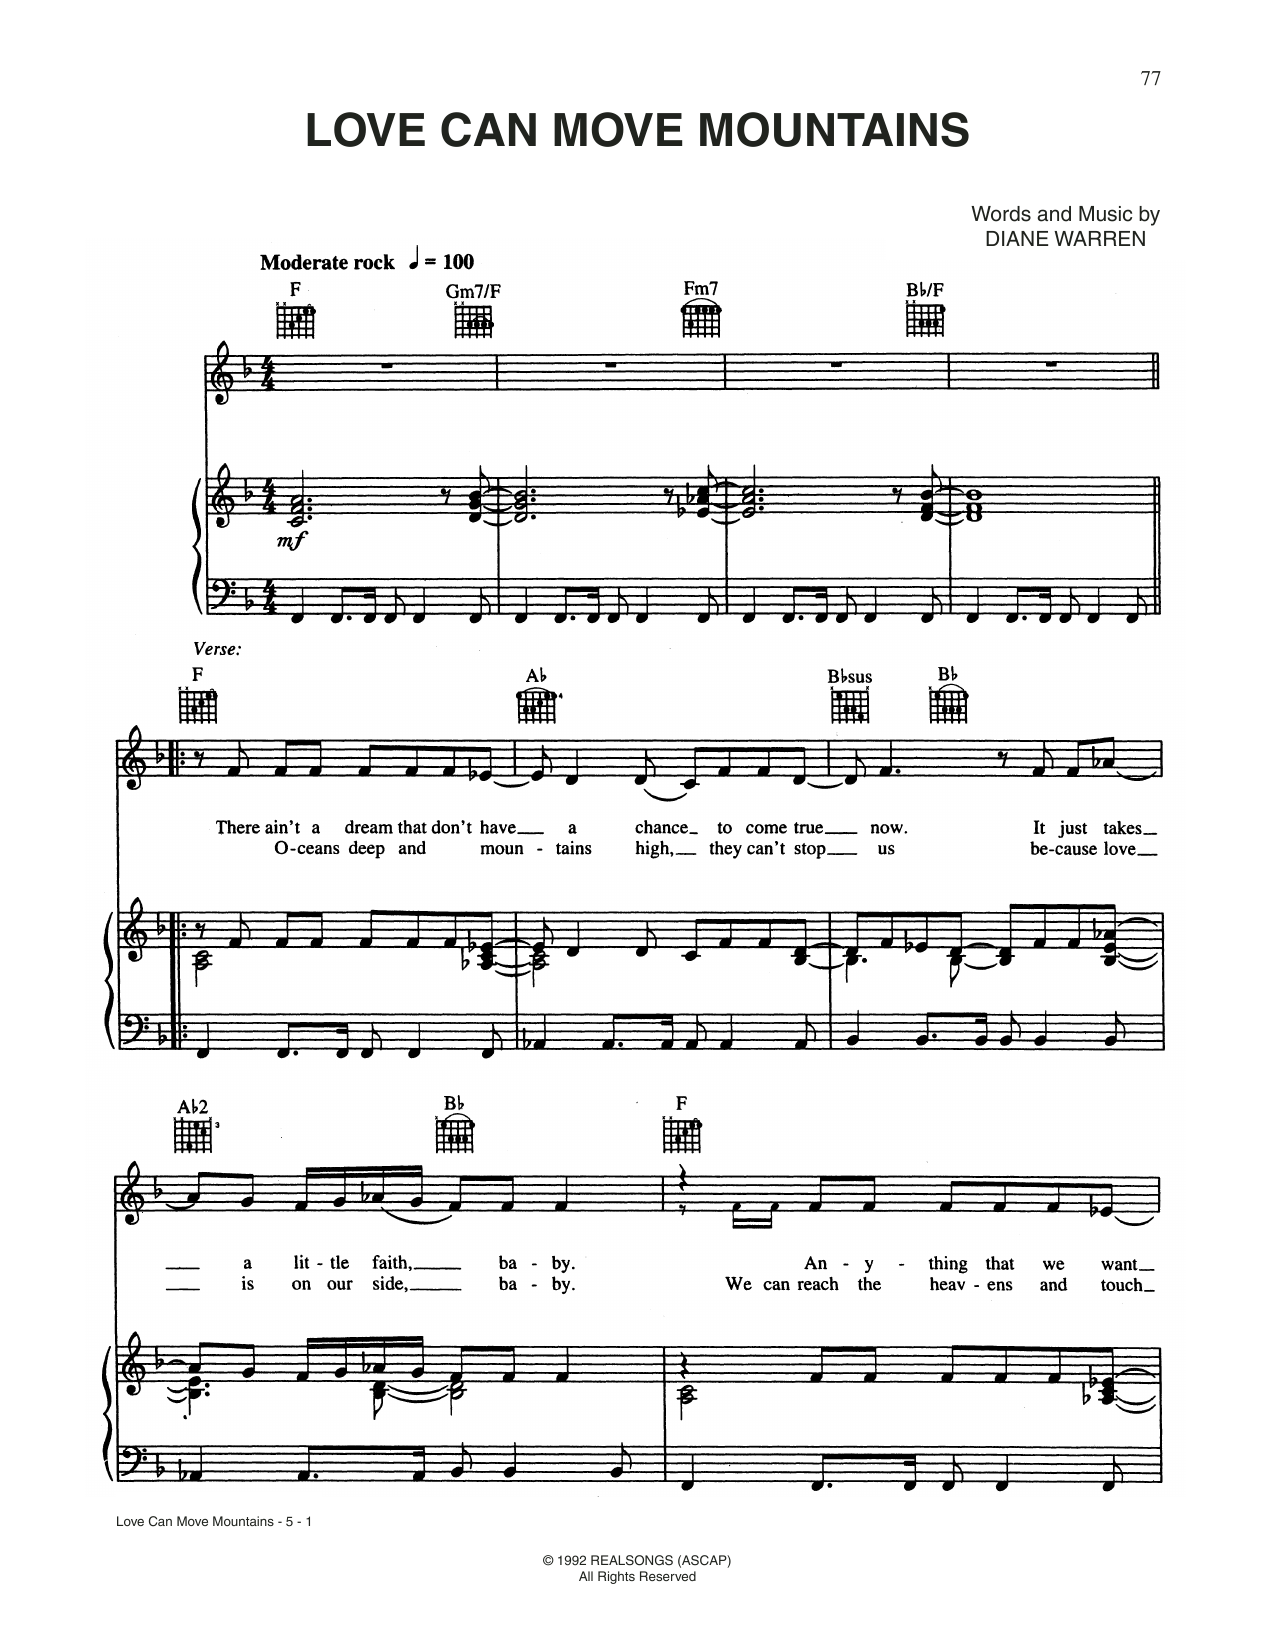 Download CÉLINE DION Love Can Move Mountains Sheet Music